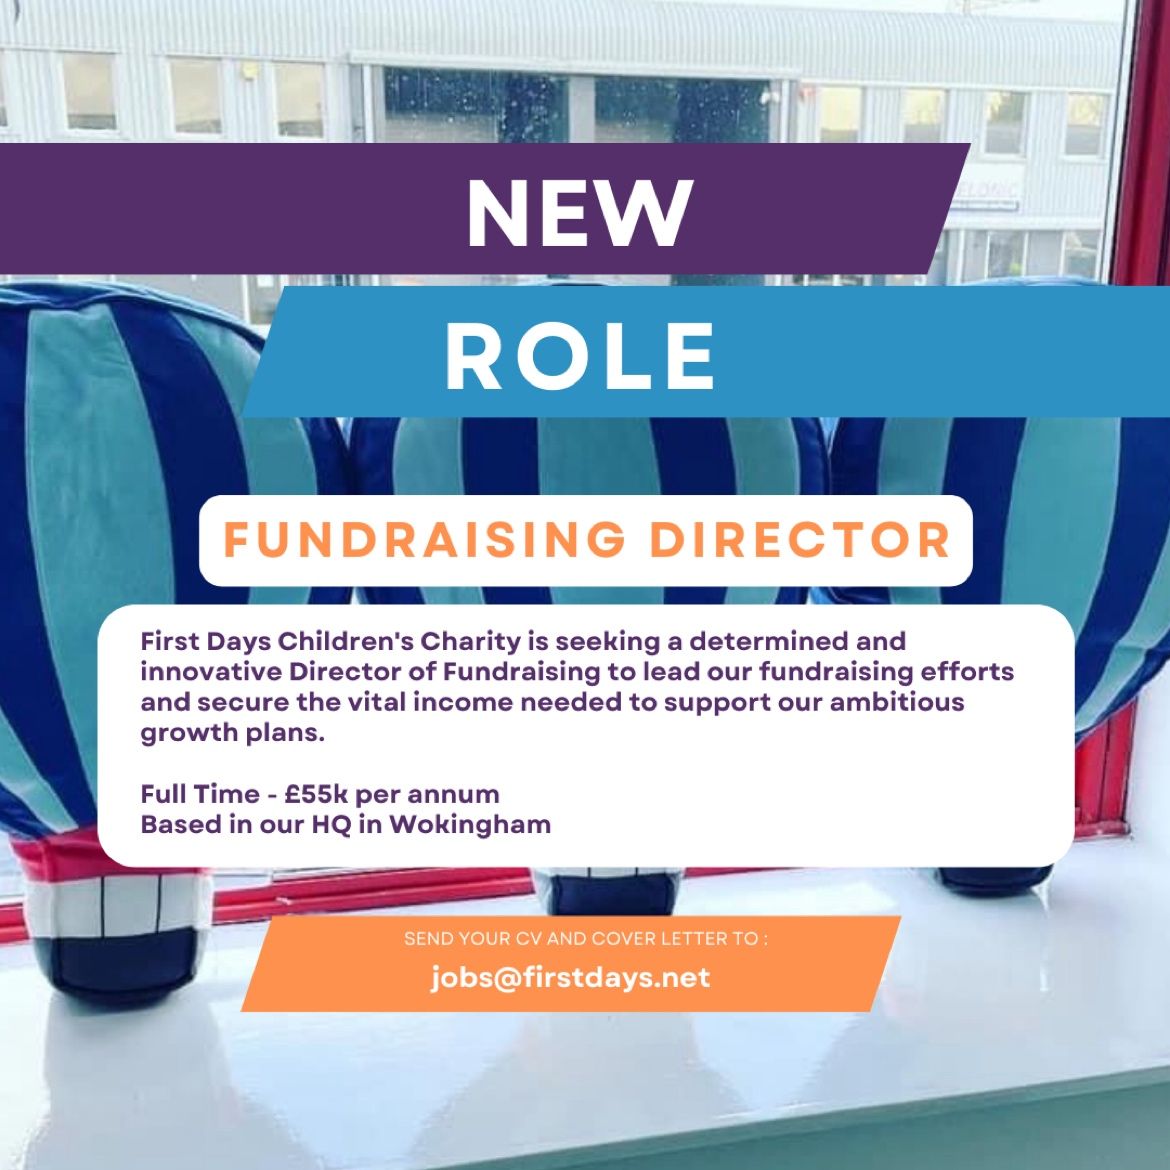 We are seeking a determined and innovative Director of Fundraising to lead our fundraising efforts and secure the vital income needed to support our ambitious growth plans. Visit our website for more info: firstdays.net/jointheteam